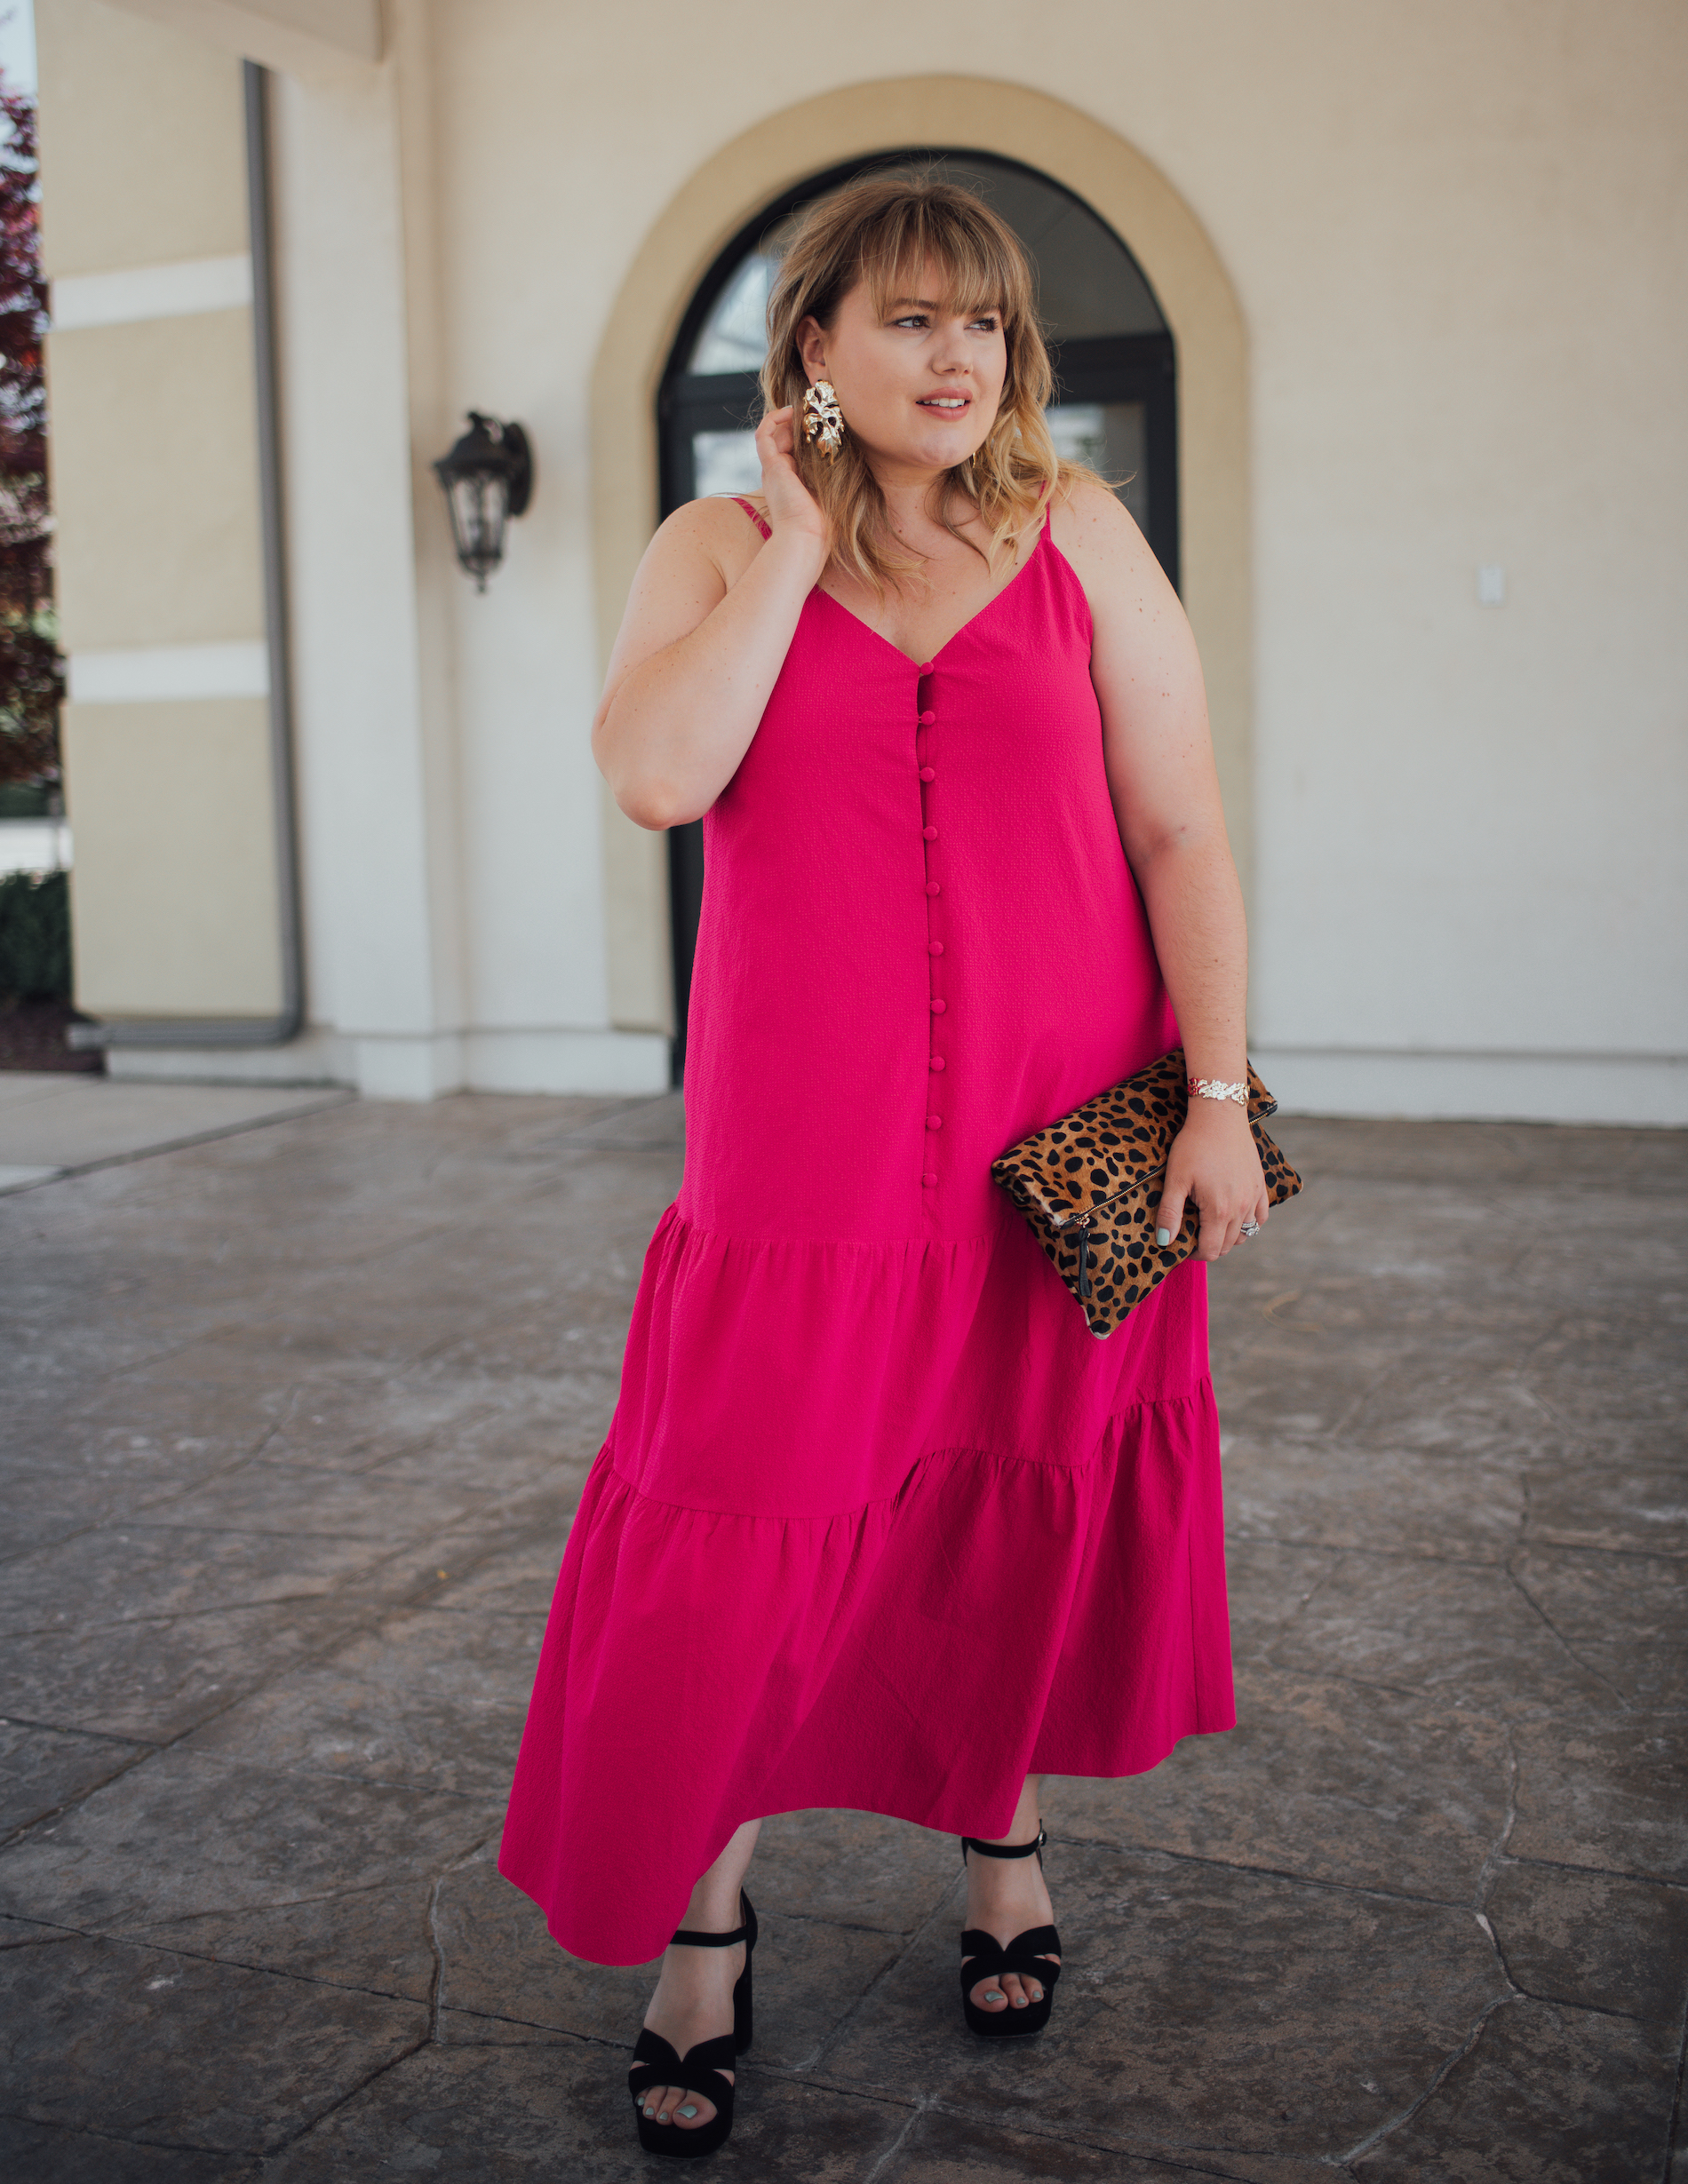 Pink + Leopard. Sharing some chic pink and leopard pieces that make the perfect summer outfit, great for hot days! 